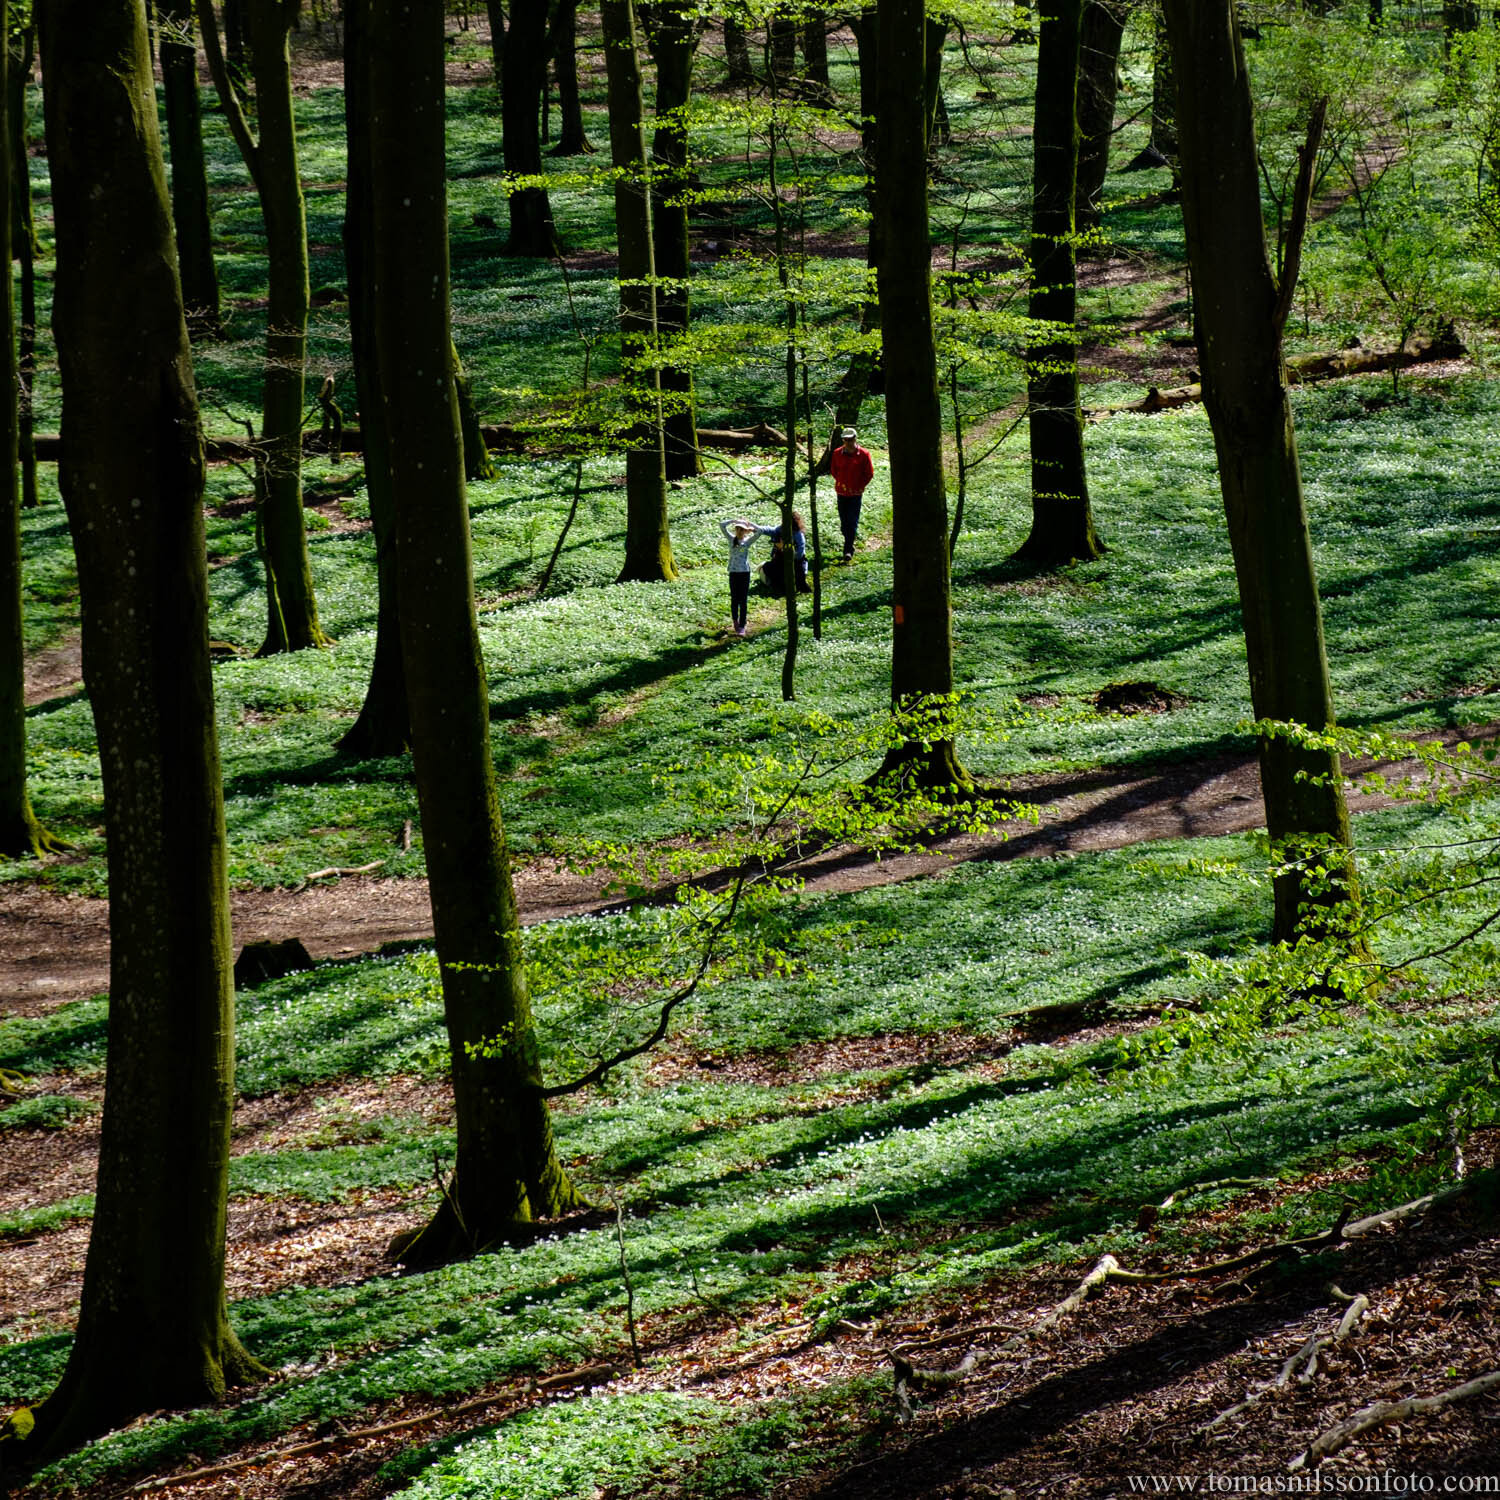 Day 130 - May 10: Forest Family